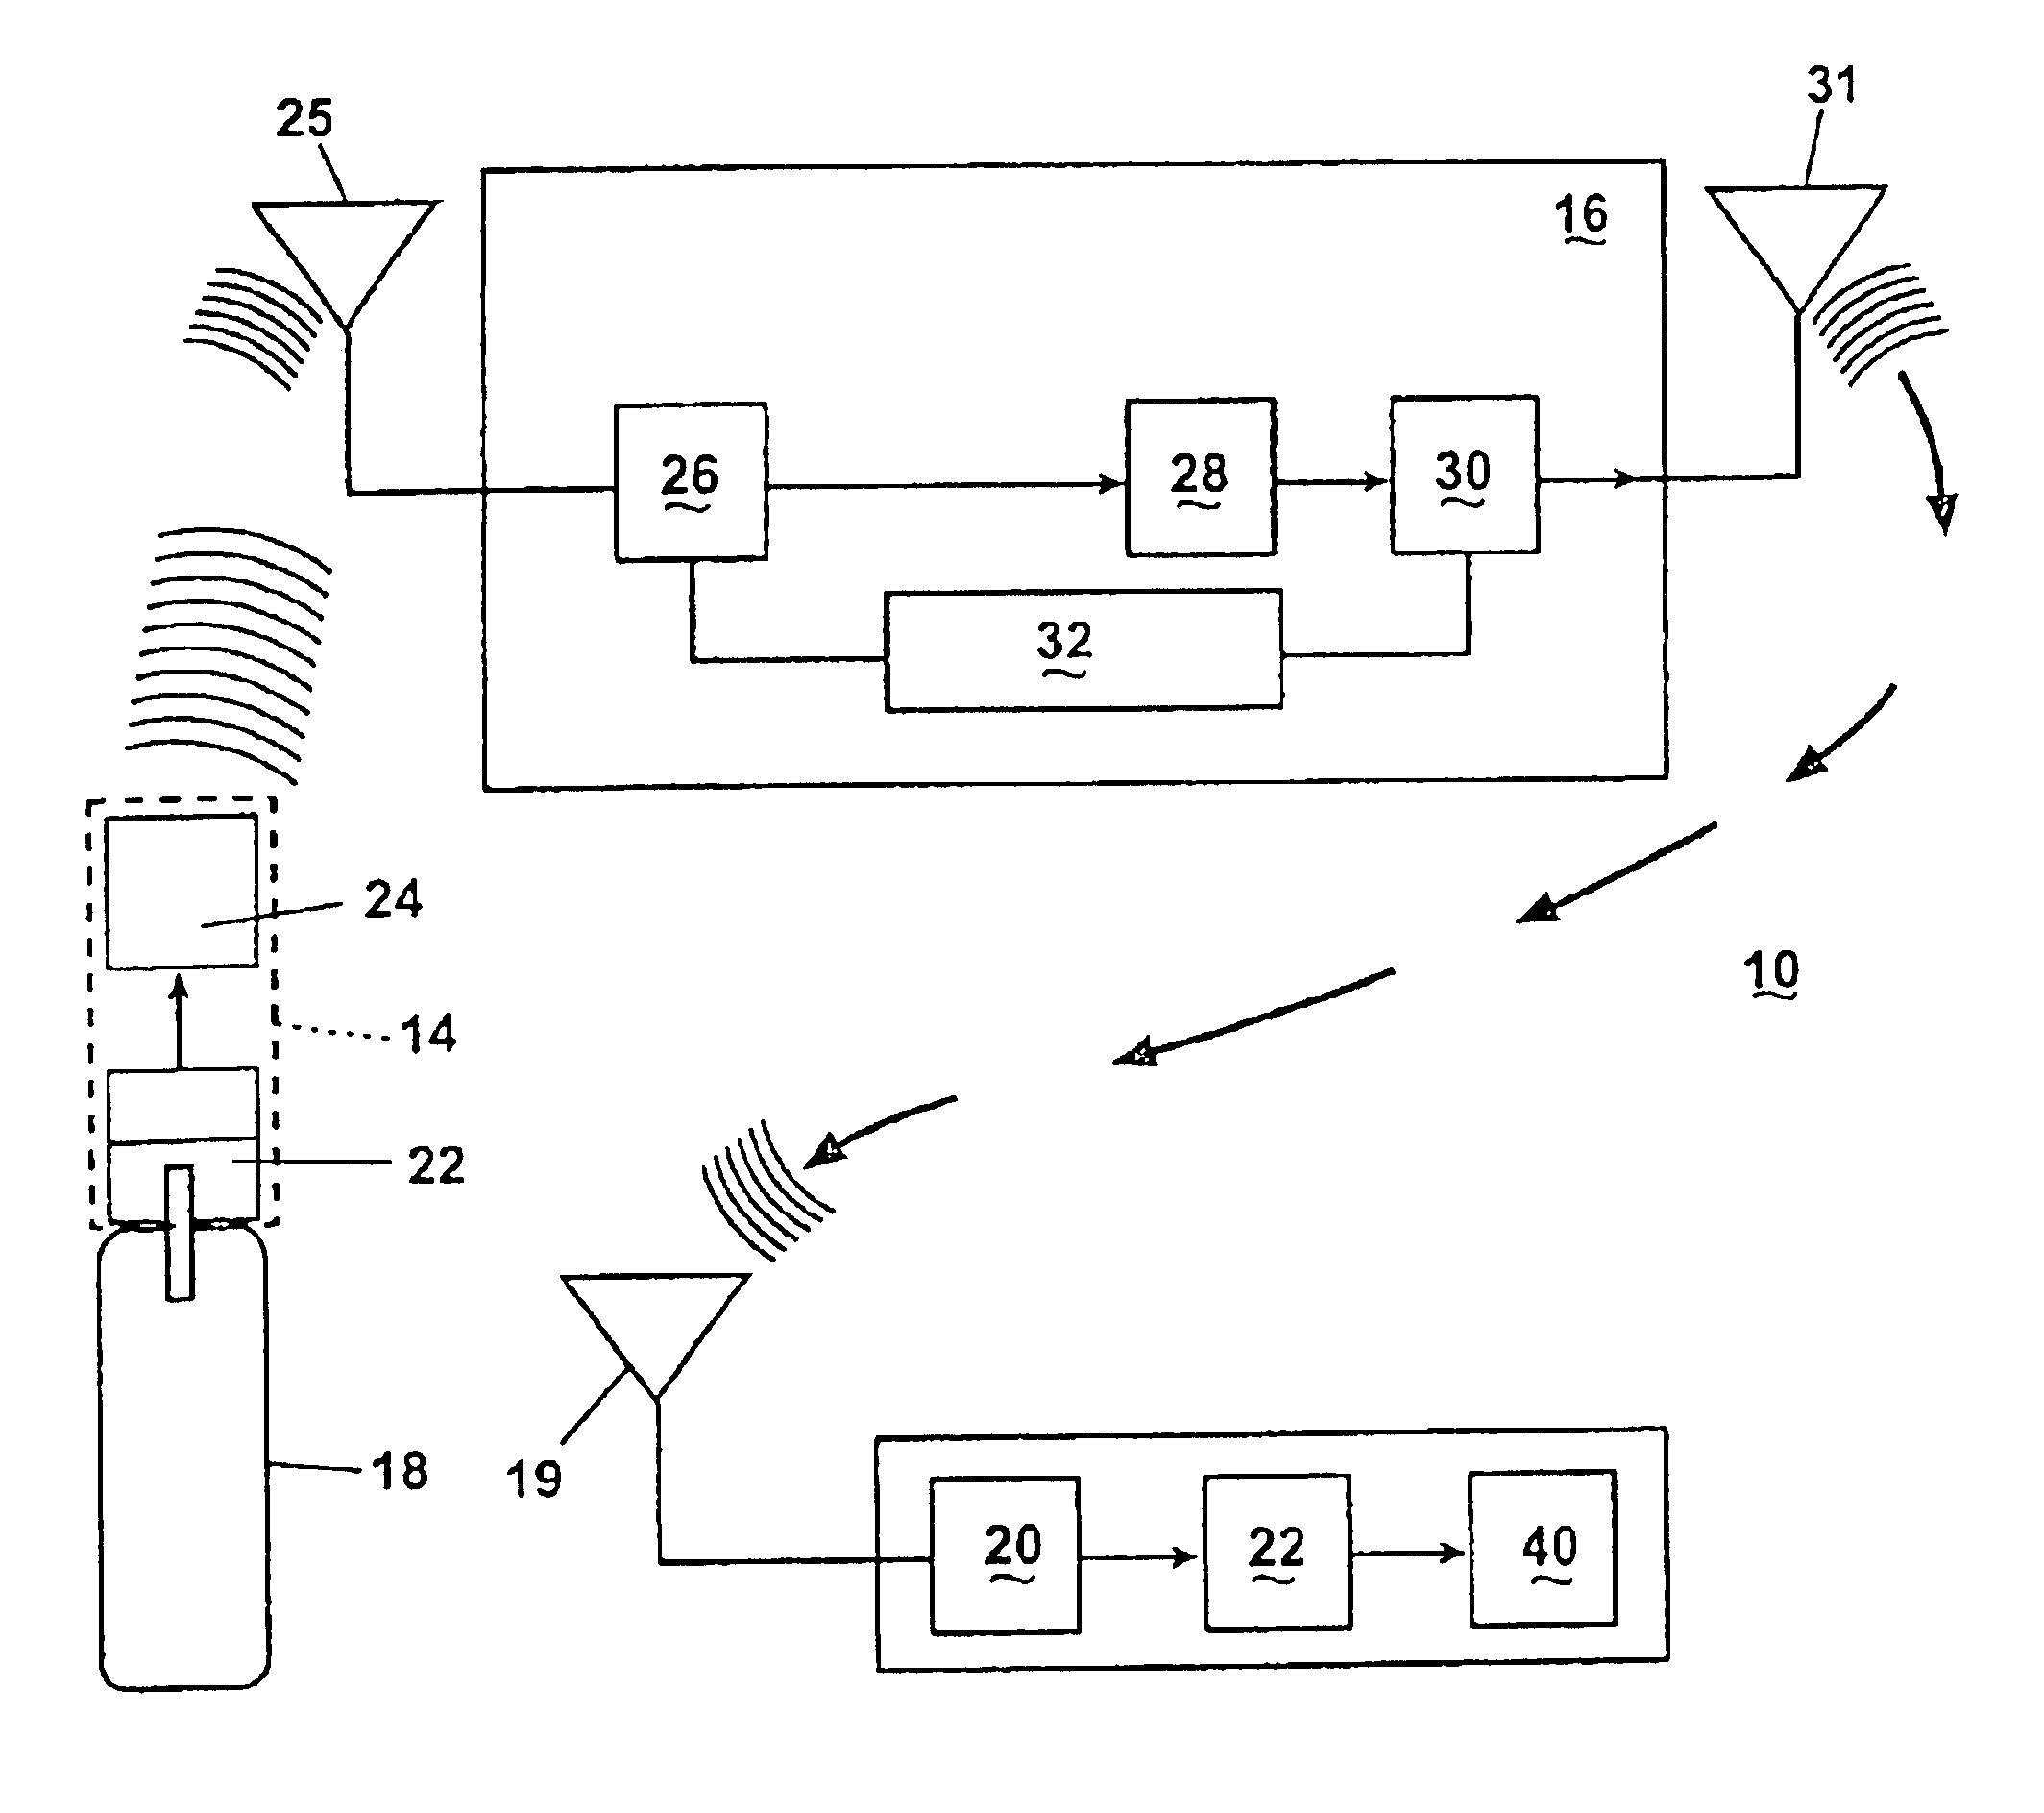 Tire pressure monitor and location identification system and method